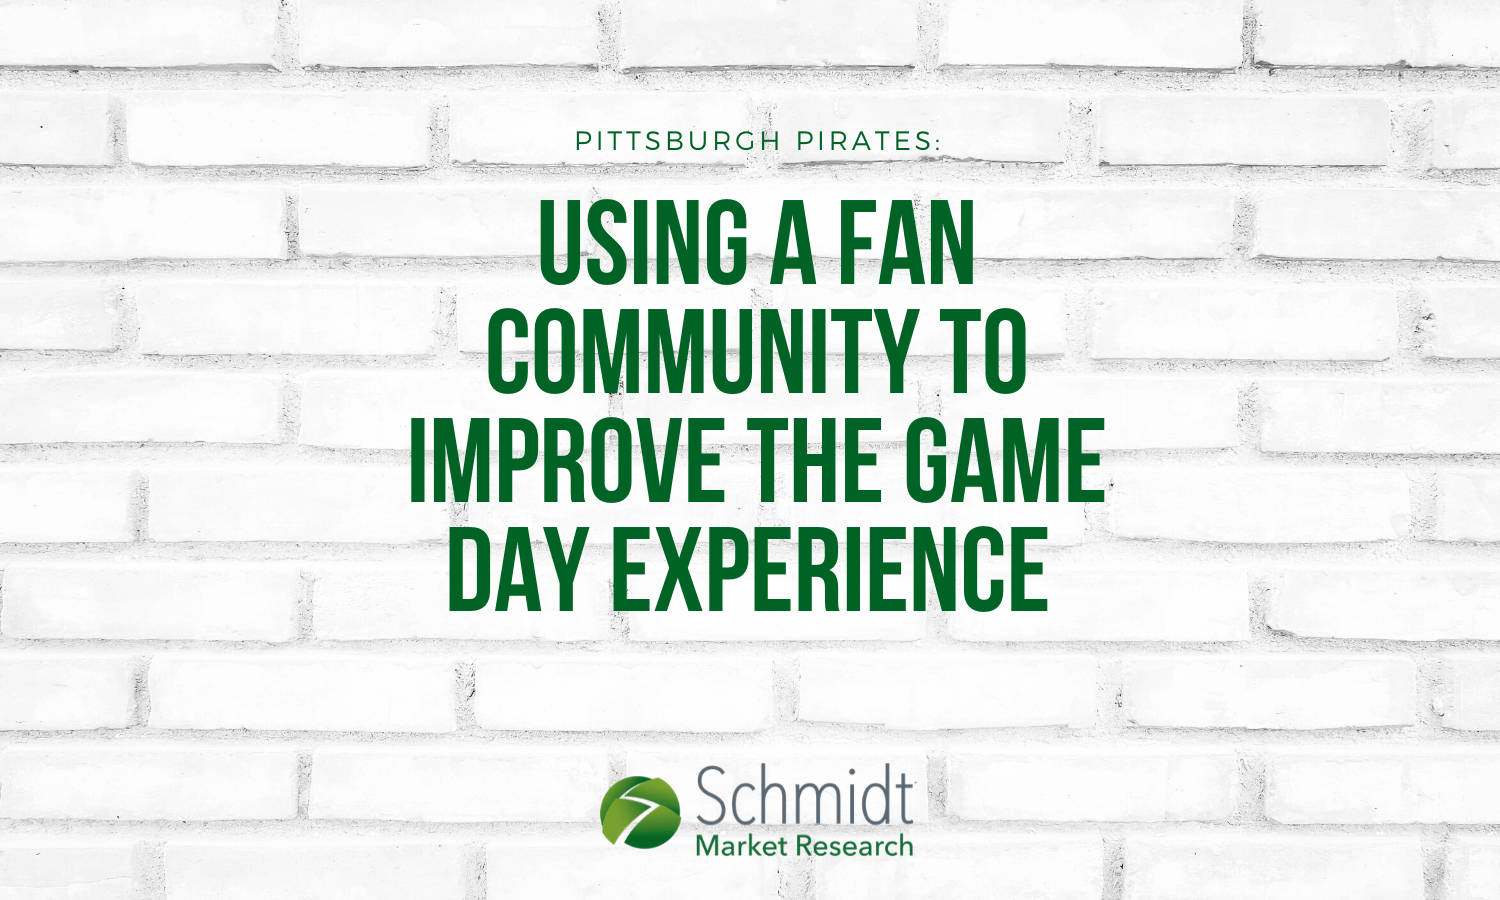 Schmidt Market Research and the Pittsburgh Pirates: Using a fan community to improve the game day experience.